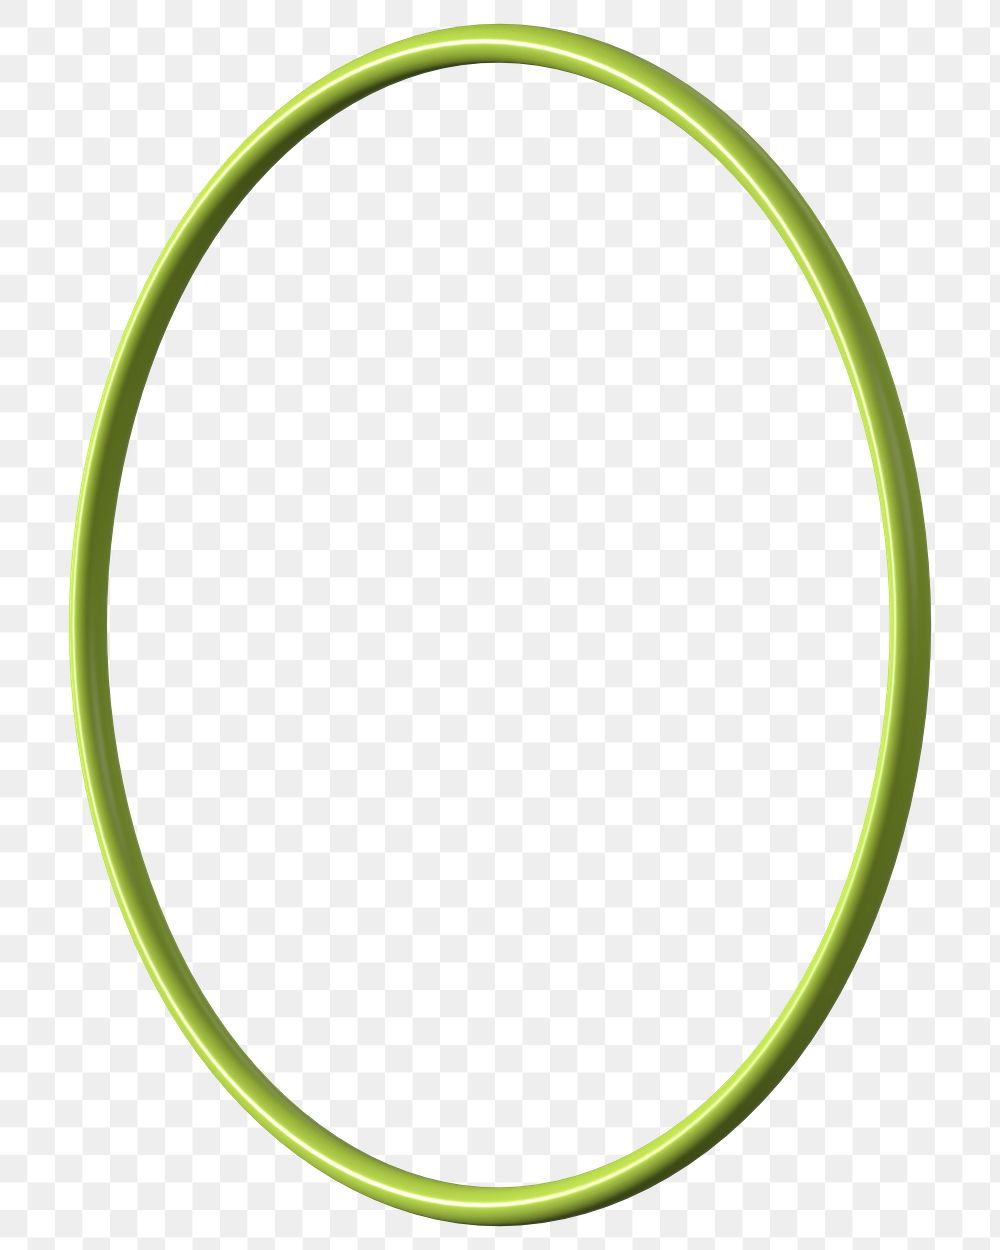 3D green ring png, oval shape, geometric clipart, transparent background